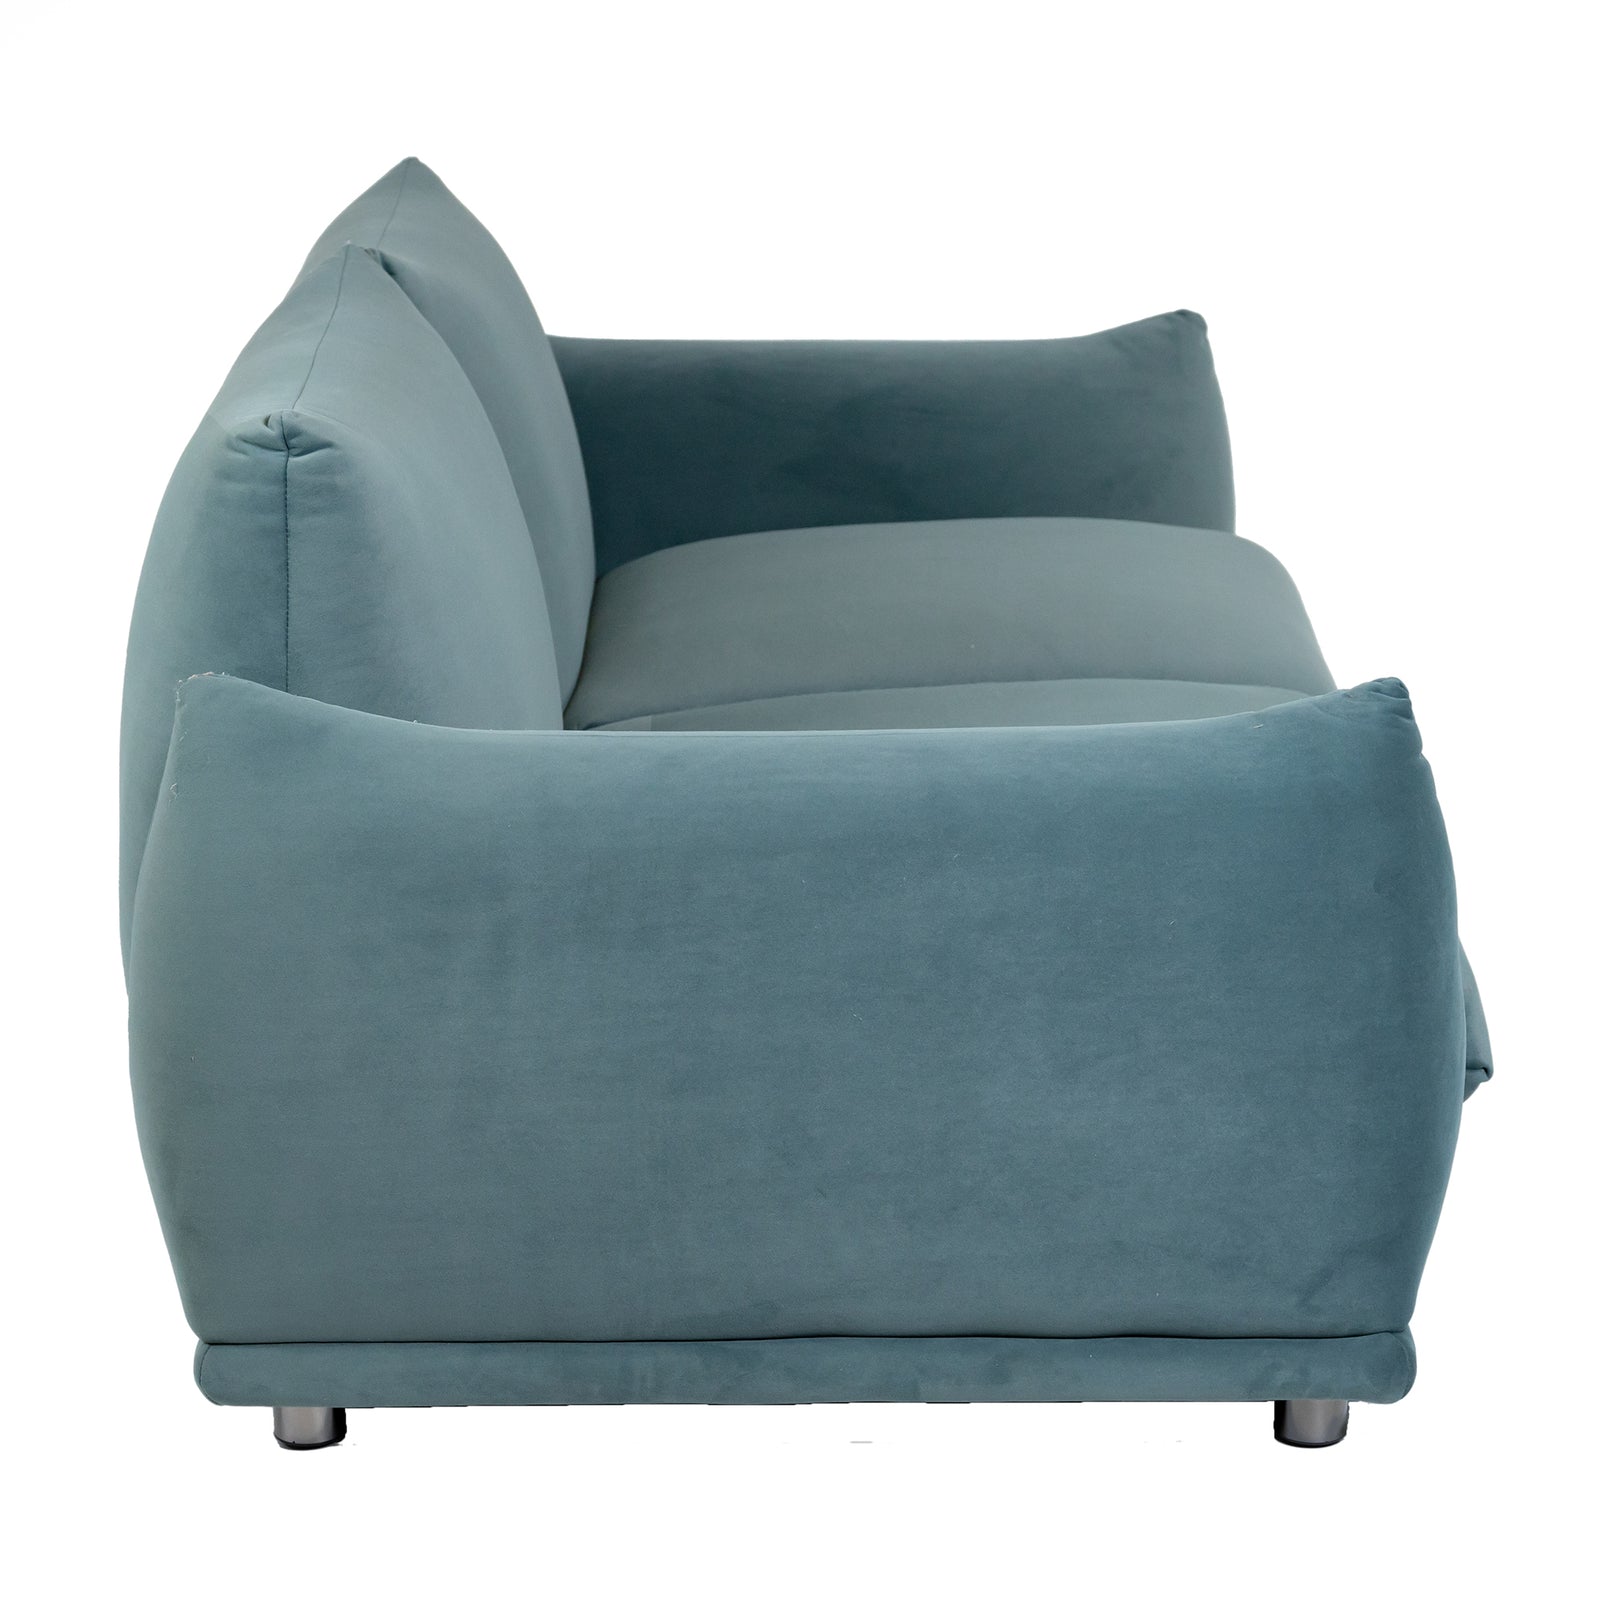 Marenco Style Sofa Steel Blue 2 Seater